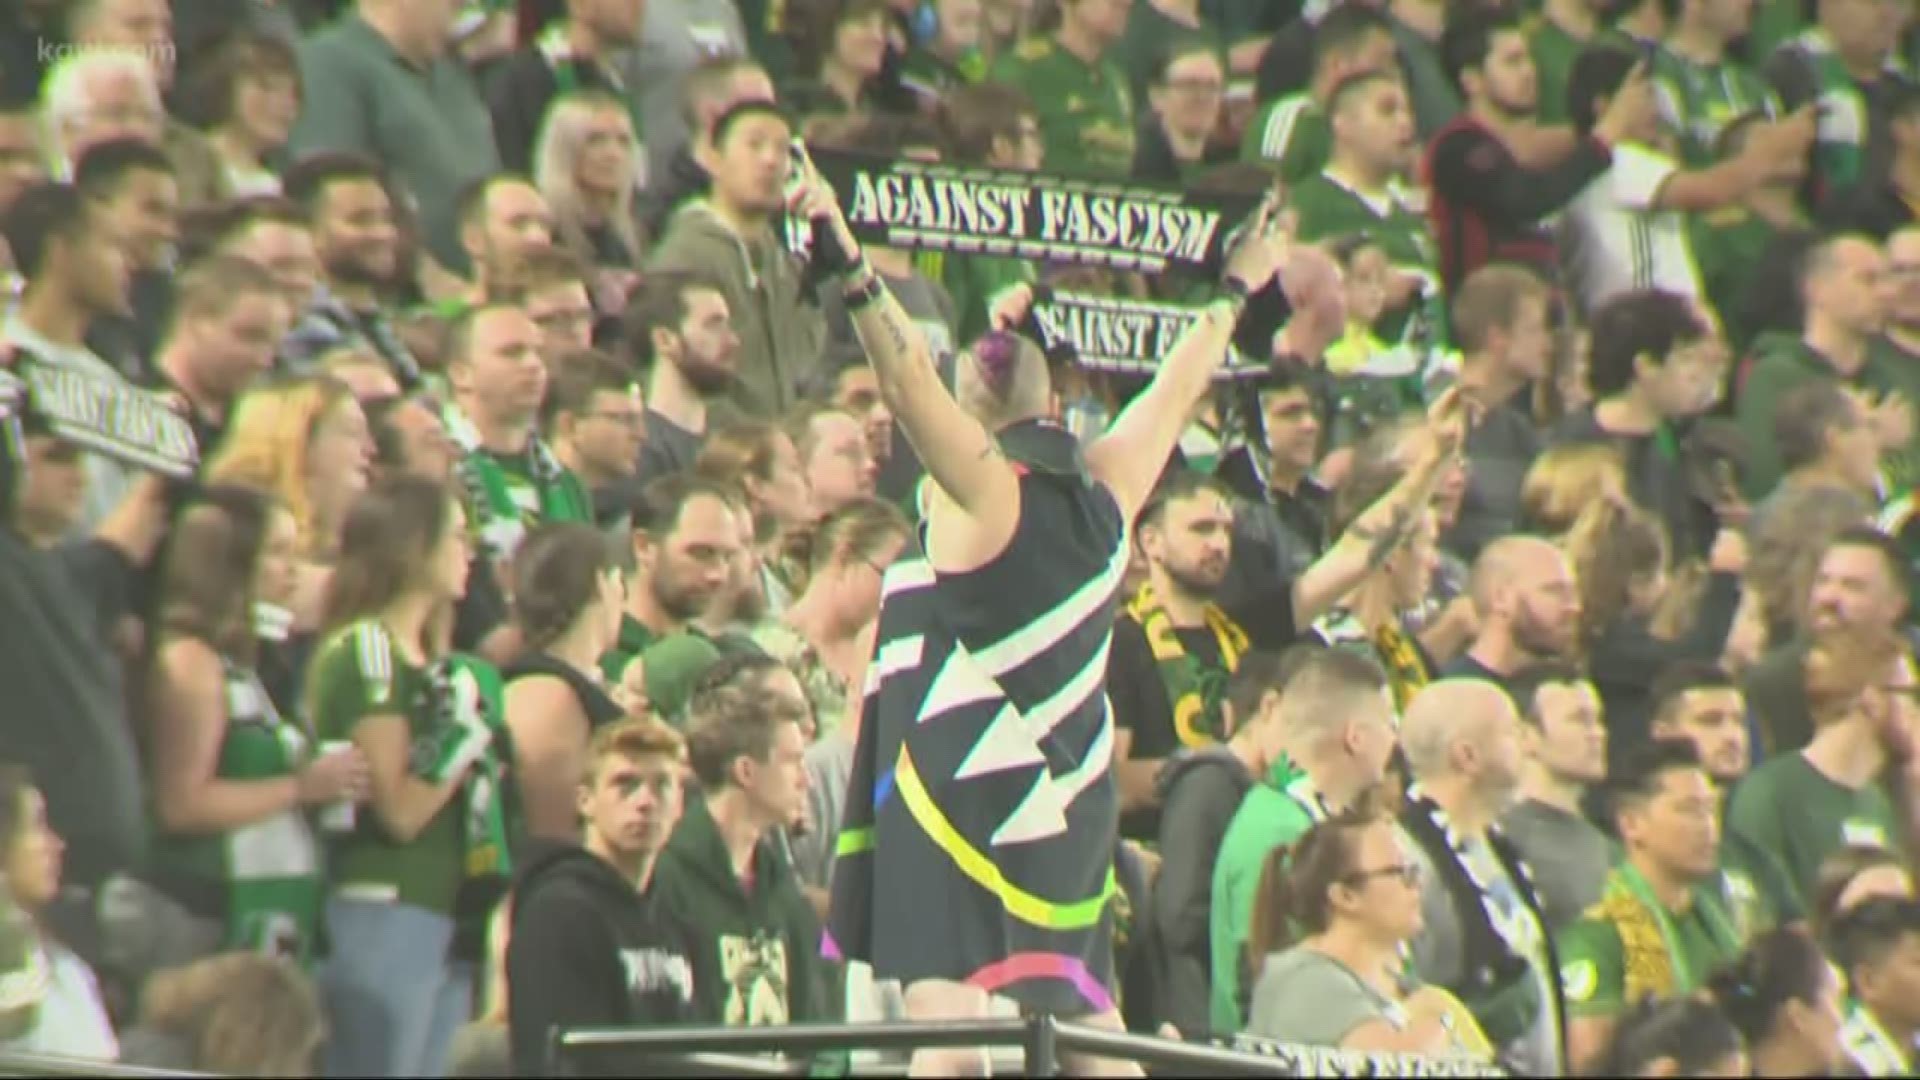 Timbers fans banned over political signs